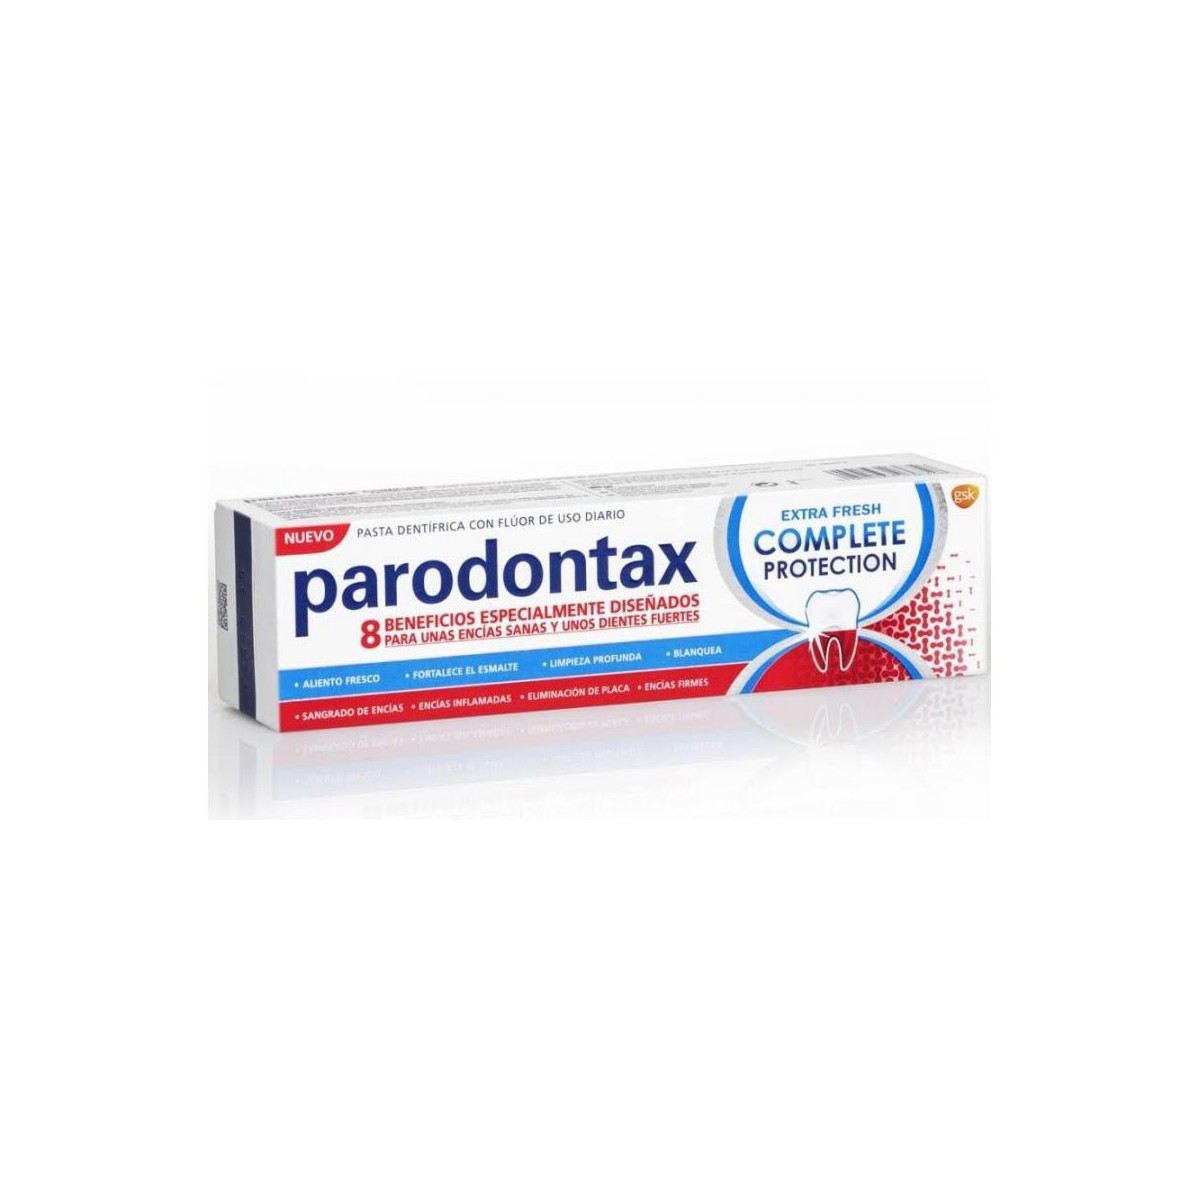 PARODONTAX COMPLETE PROTECTION 75 ML